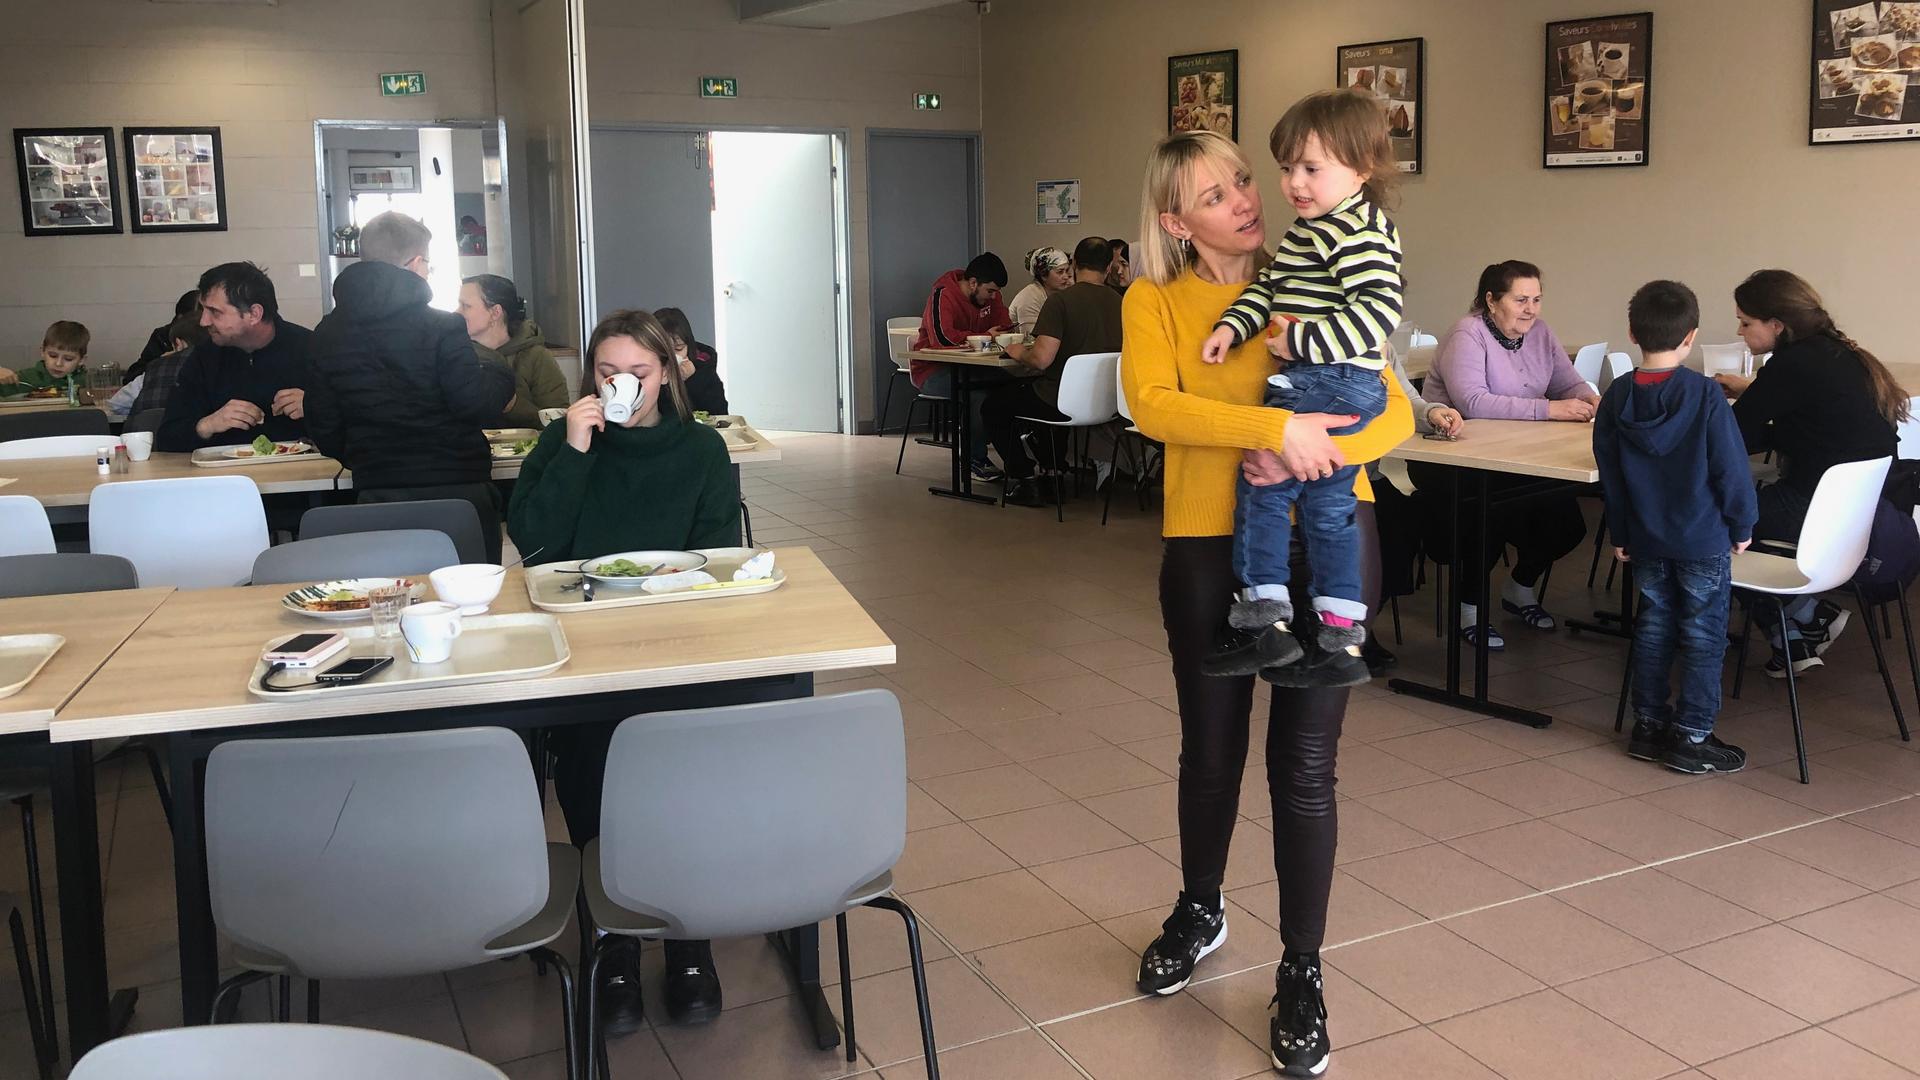 Some 160 Ukrainian refugees — mostly women and young children — are being housed at a shelter in Calais while they wait for their visas to go to the UK.